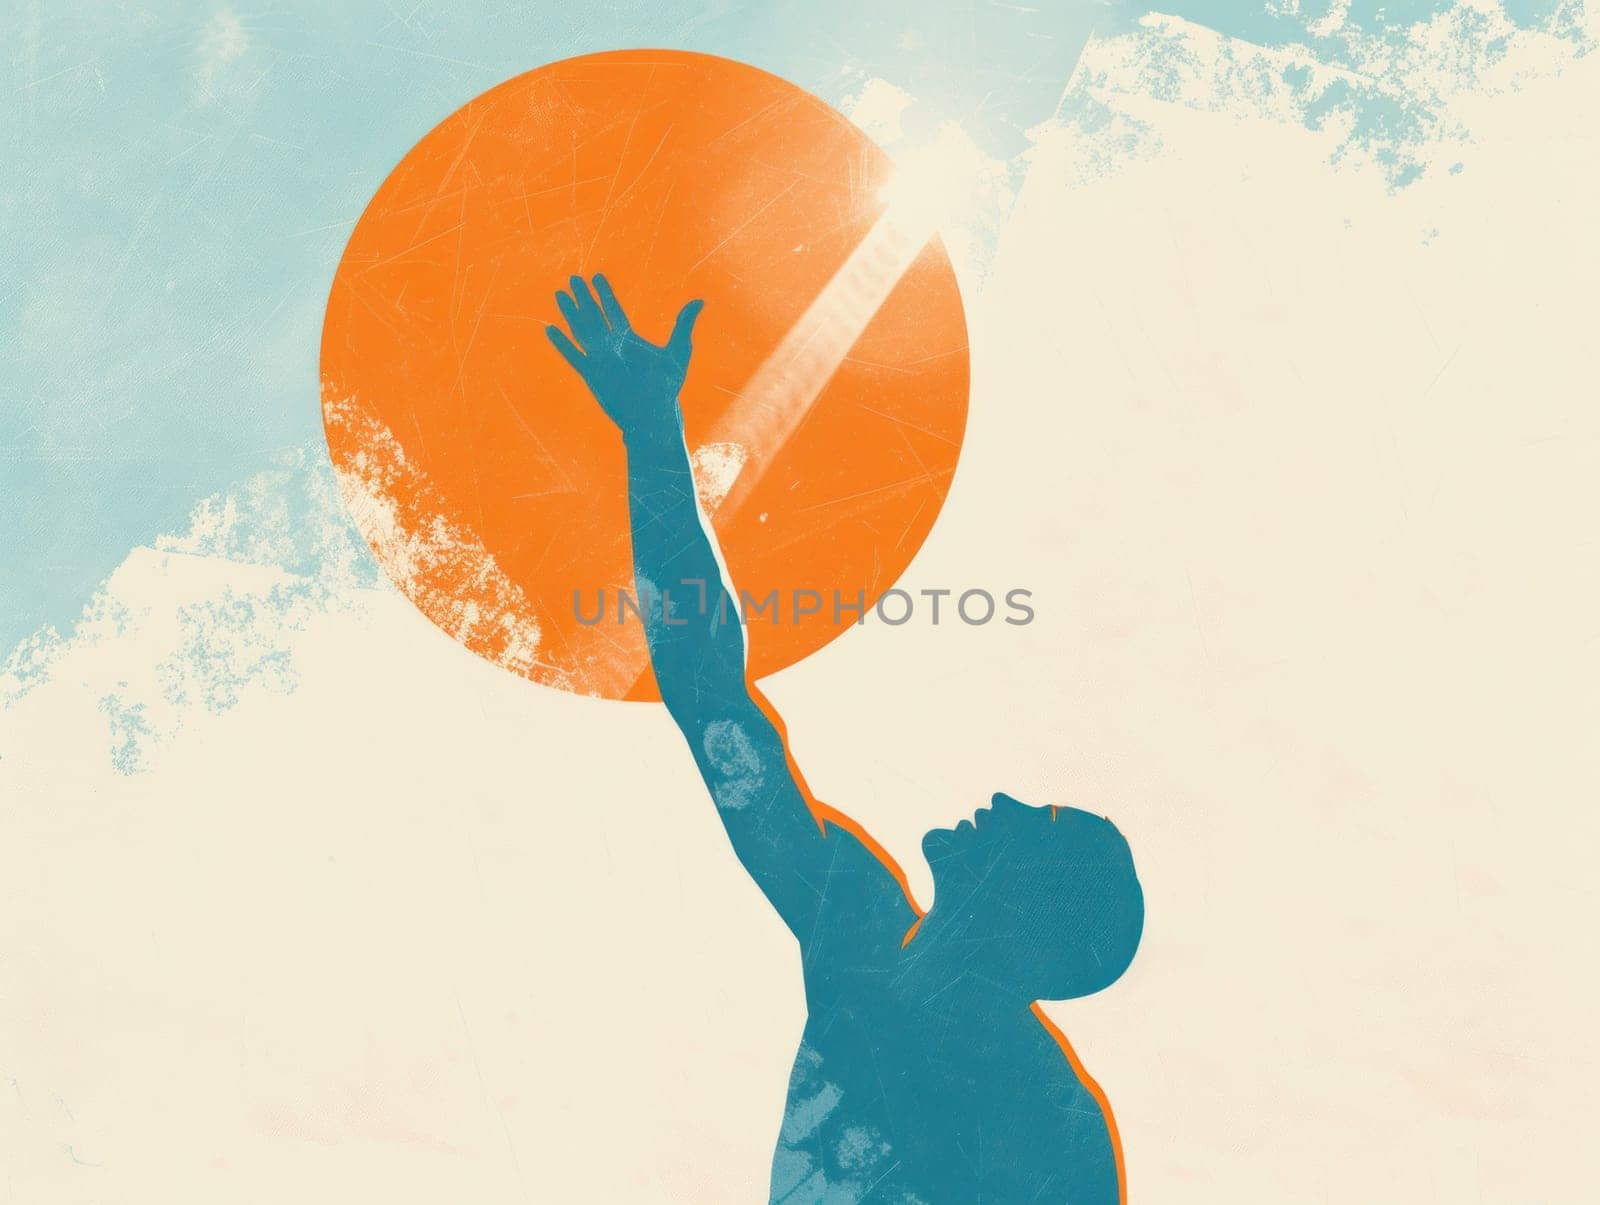 Man reaching up to catch vibrant orange and blue ball in the air as a form of artistic expression by Vichizh